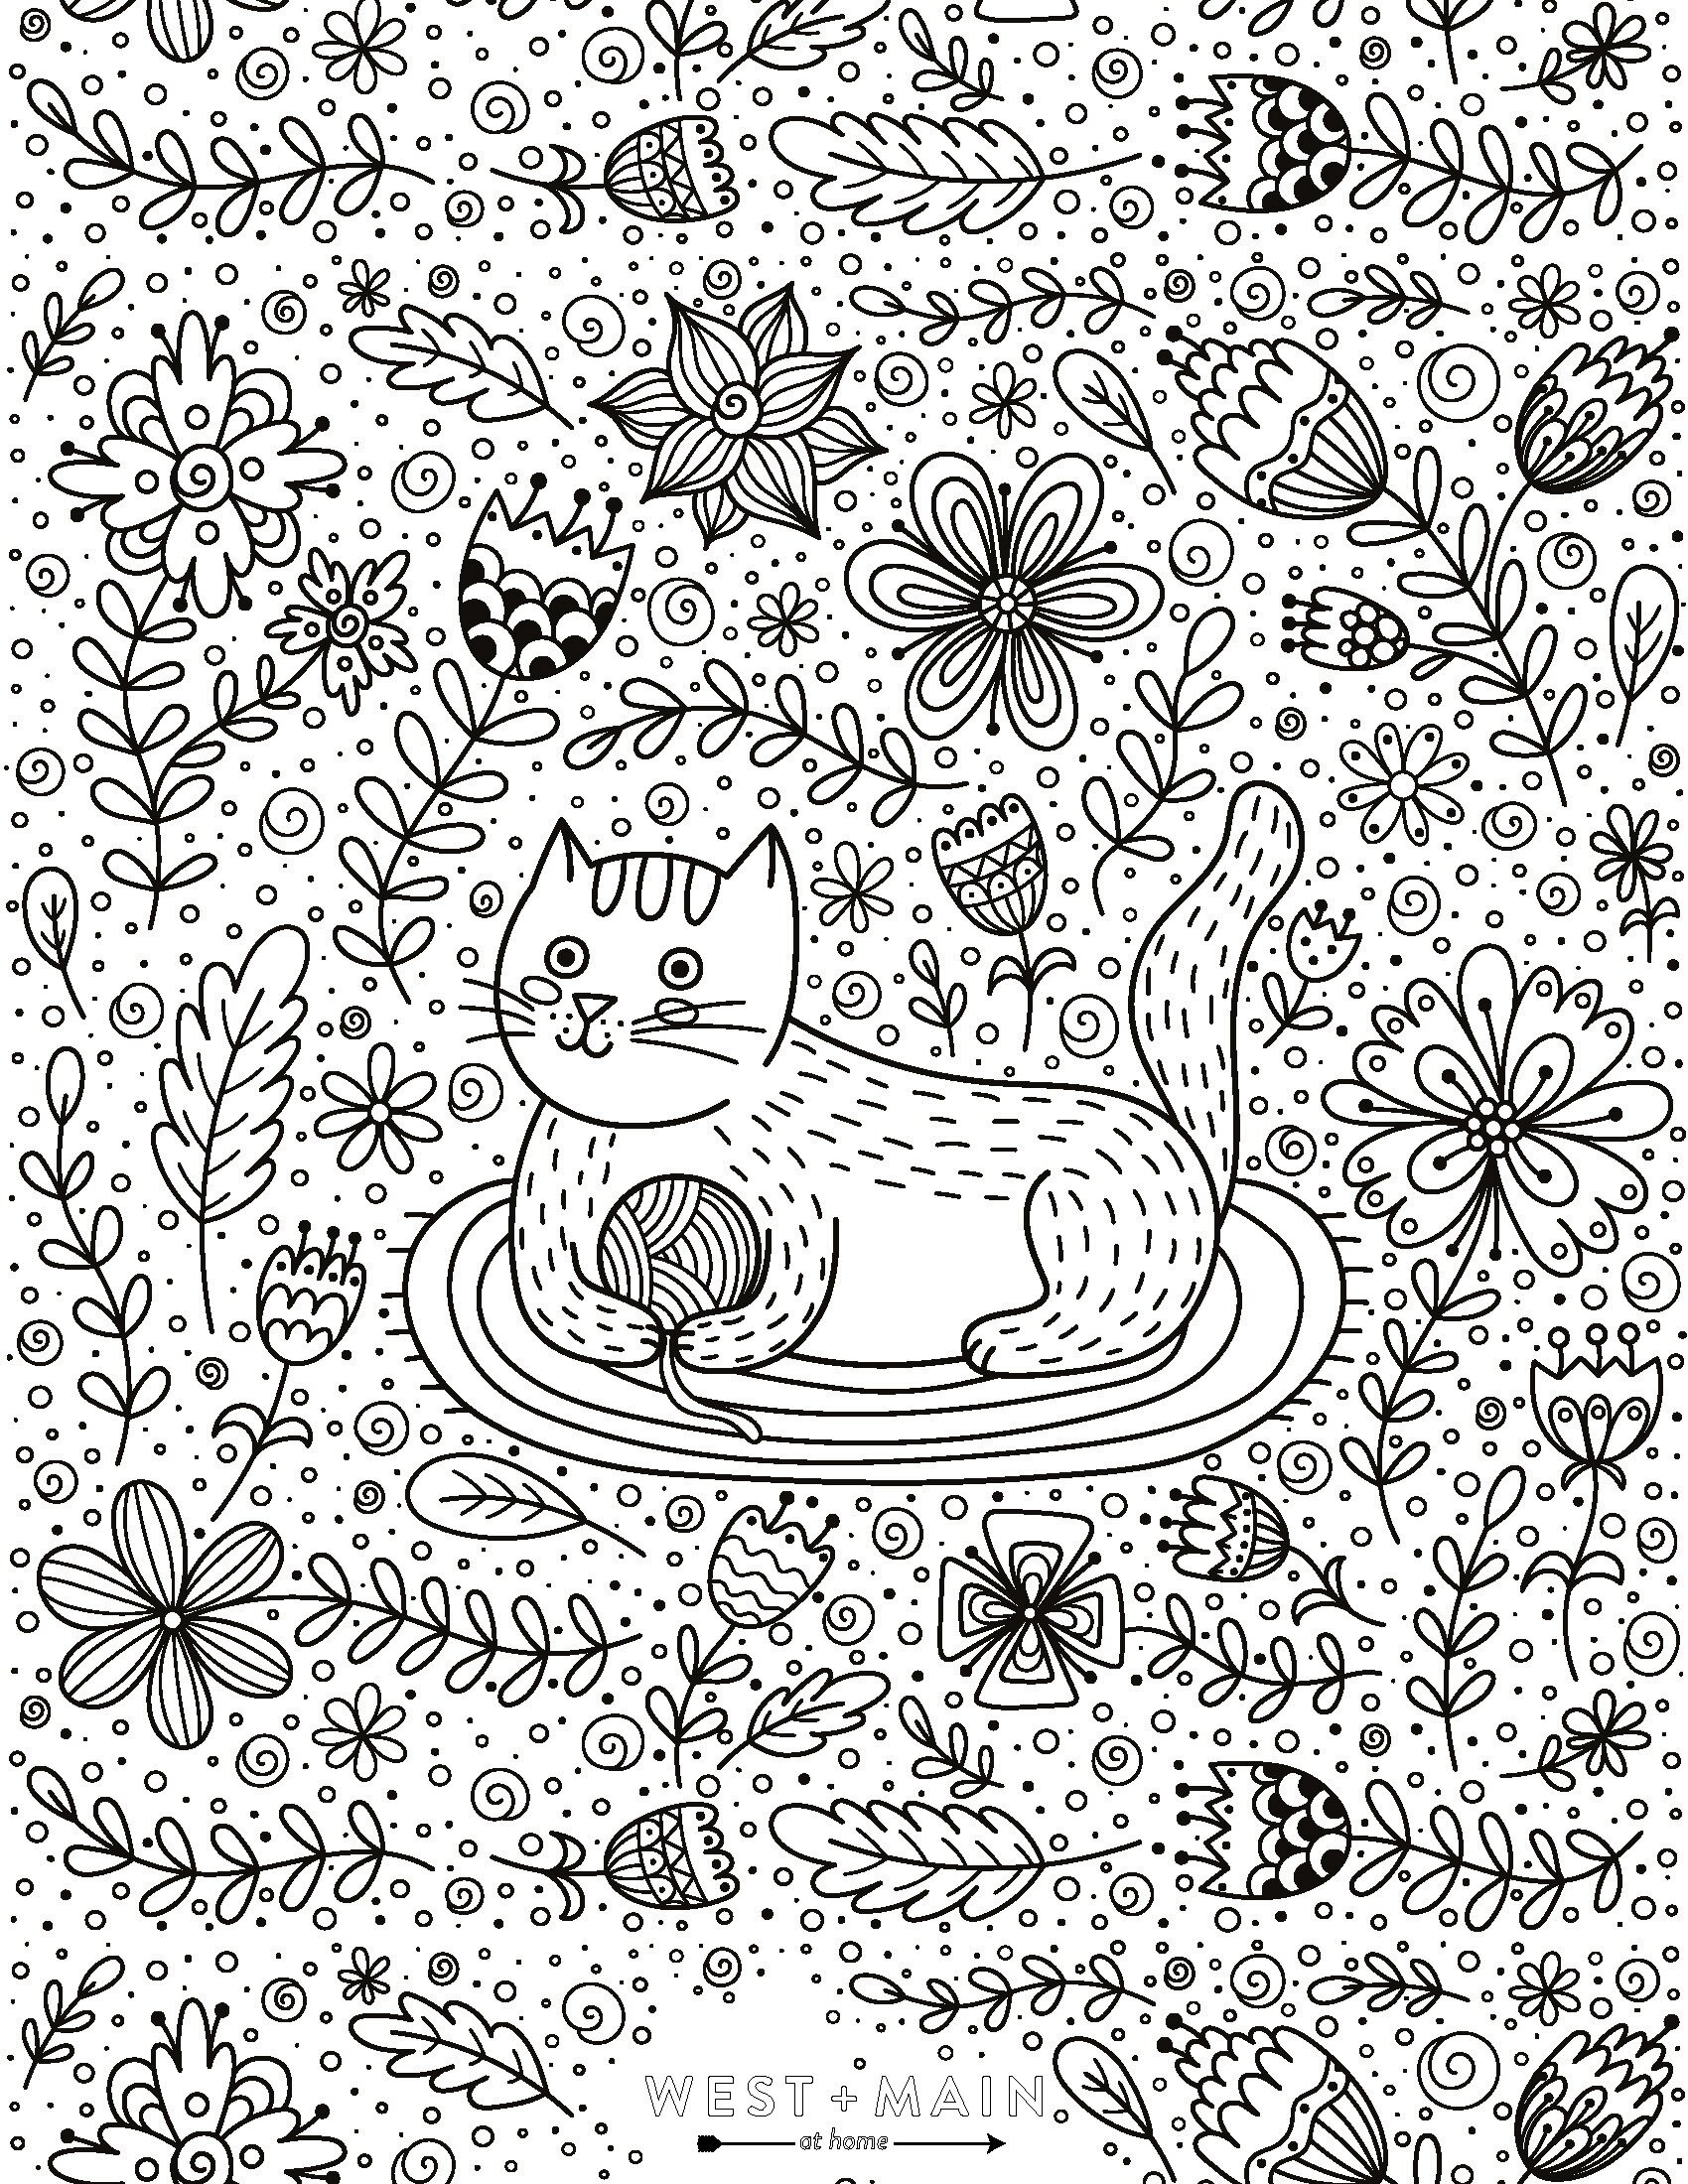 Stay Home + Color Download NEW West + Main Coloring Sheets to ...